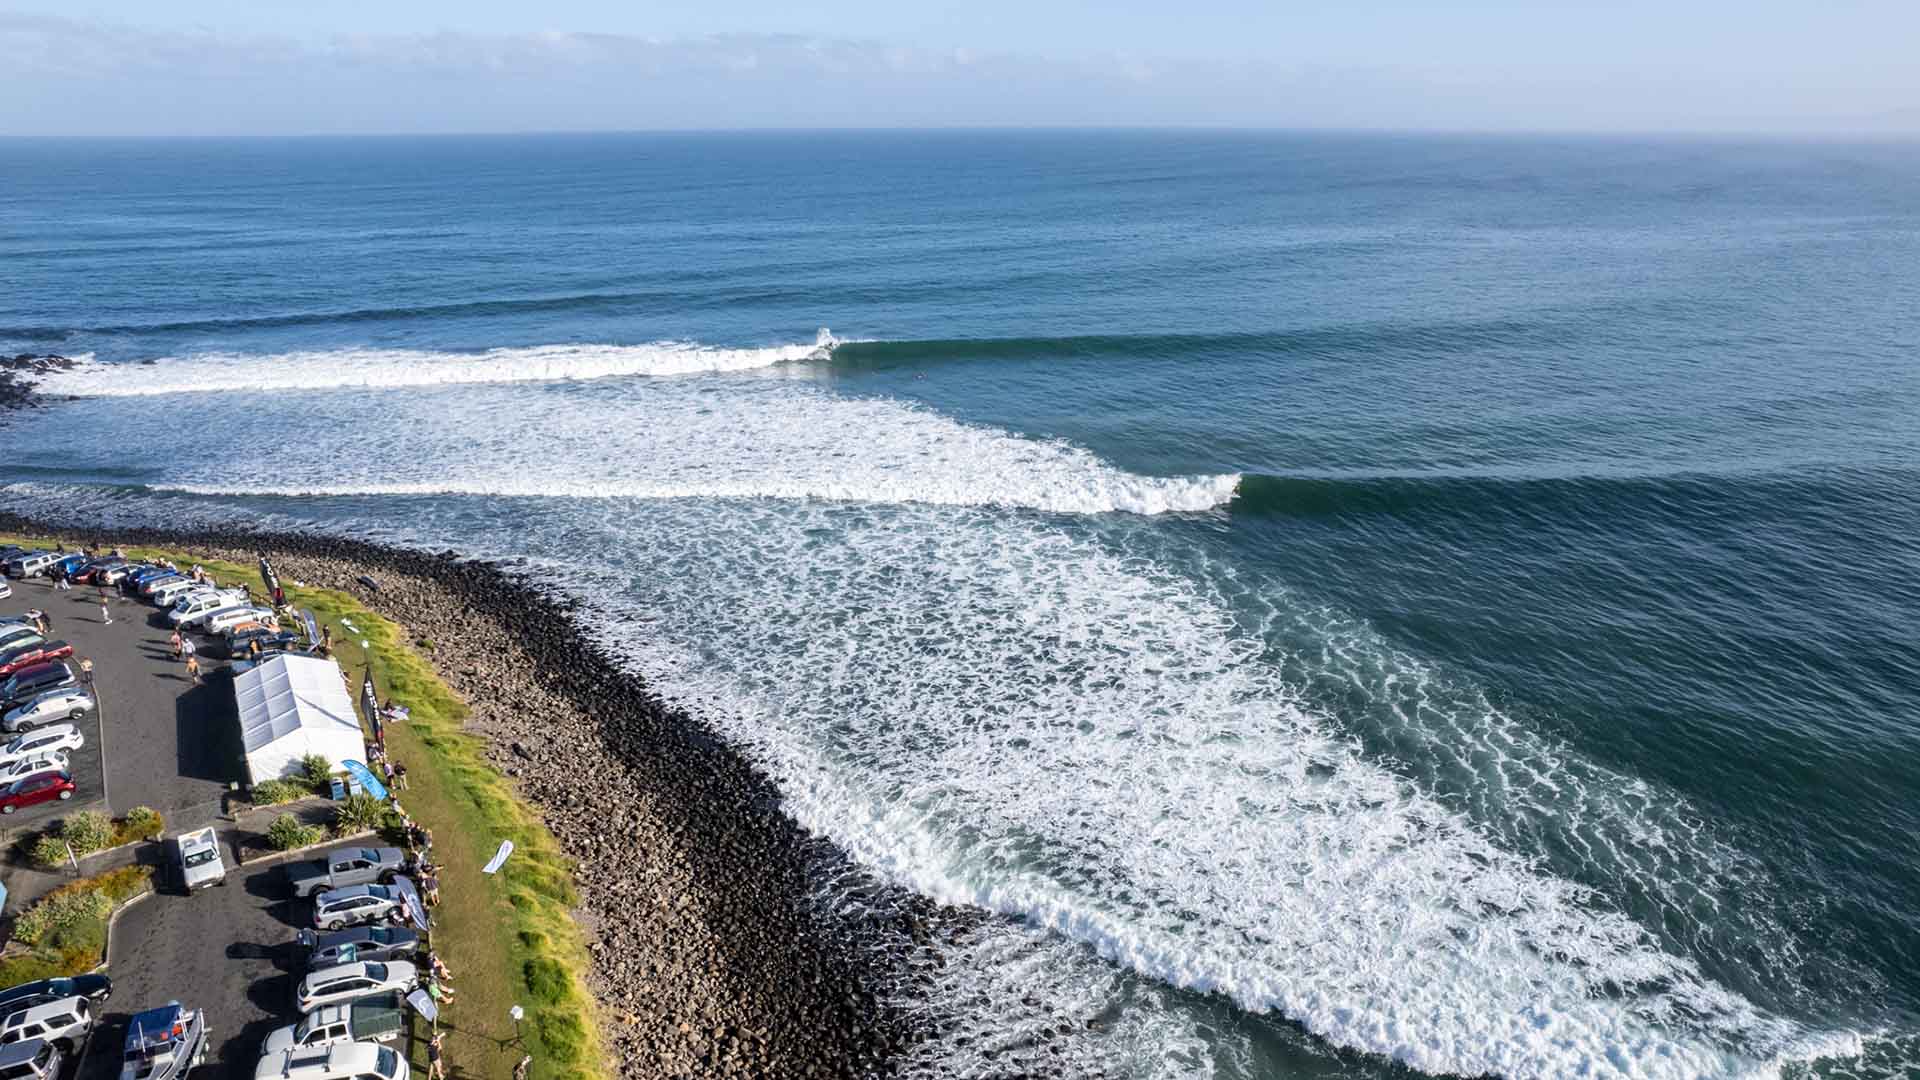 Rip Curl Raglan Pro event site from above.